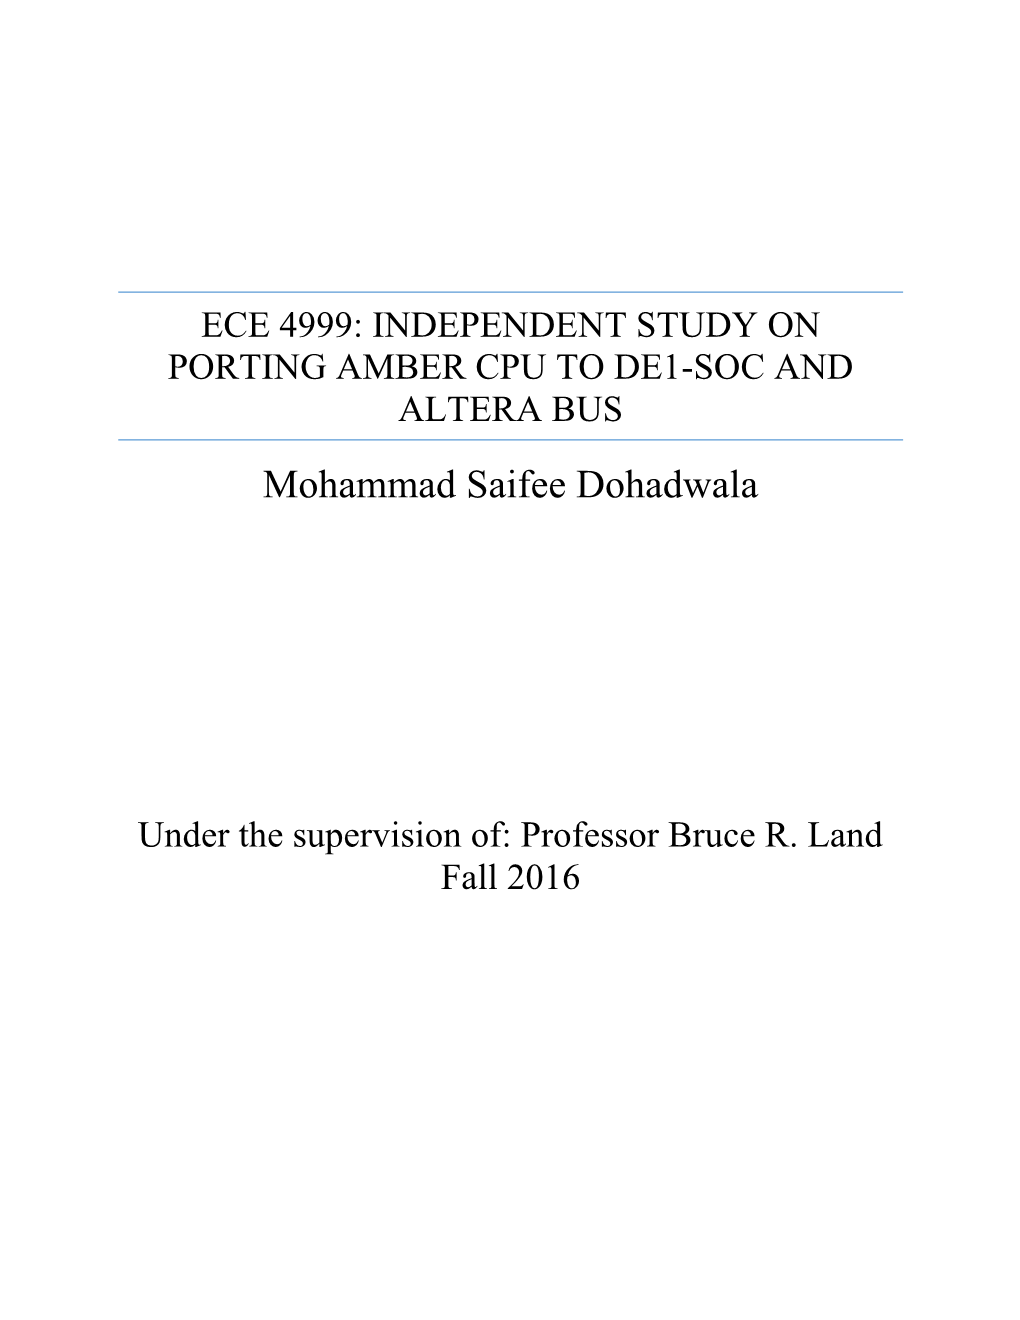 ECE 4999: INDEPENDENT STUDY on PORTING AMBER CPU to DE1-SOC and ALTERA BUS Mohammad Saifee Dohadwala